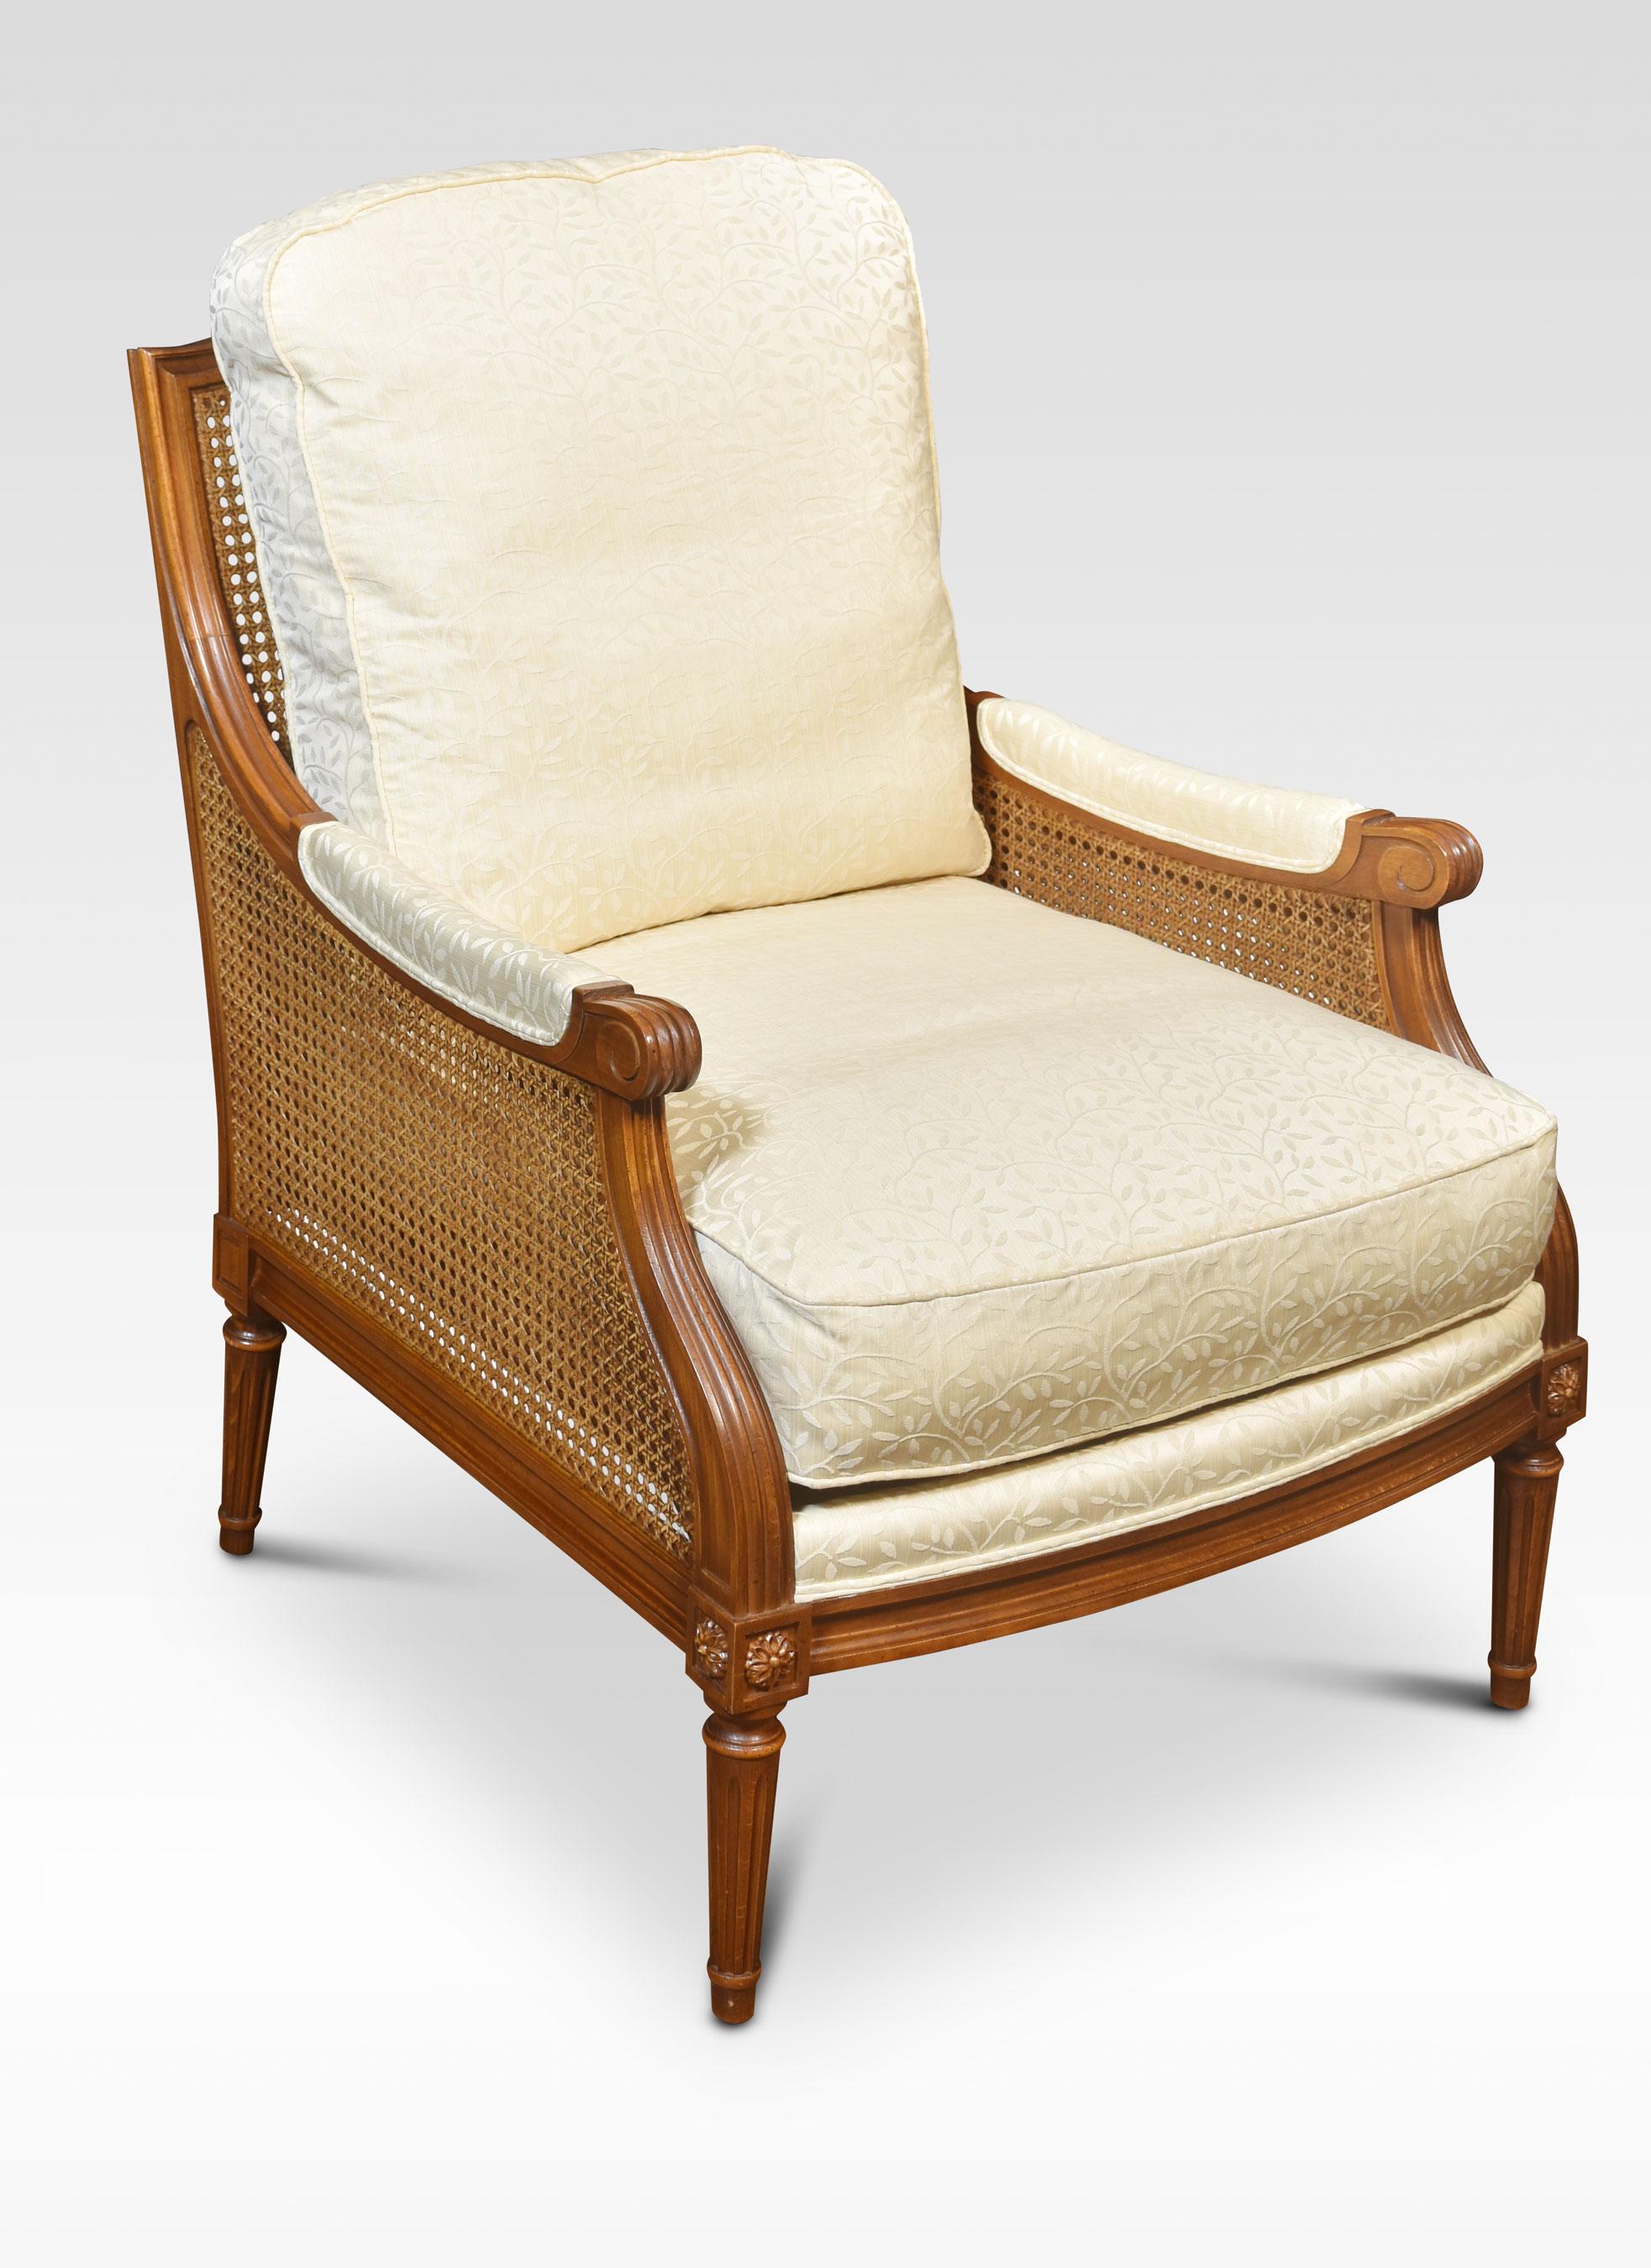 Bergere Armchair, the shaped carved molded backs, and inset bergere pannels, to the removable back and seat cushion. Raised up on turned reeded tapering legs.
Dimensions
Height 37 Inches height to seat 19 Inches
Width 27.5 Inches
Depth 33 Inches.